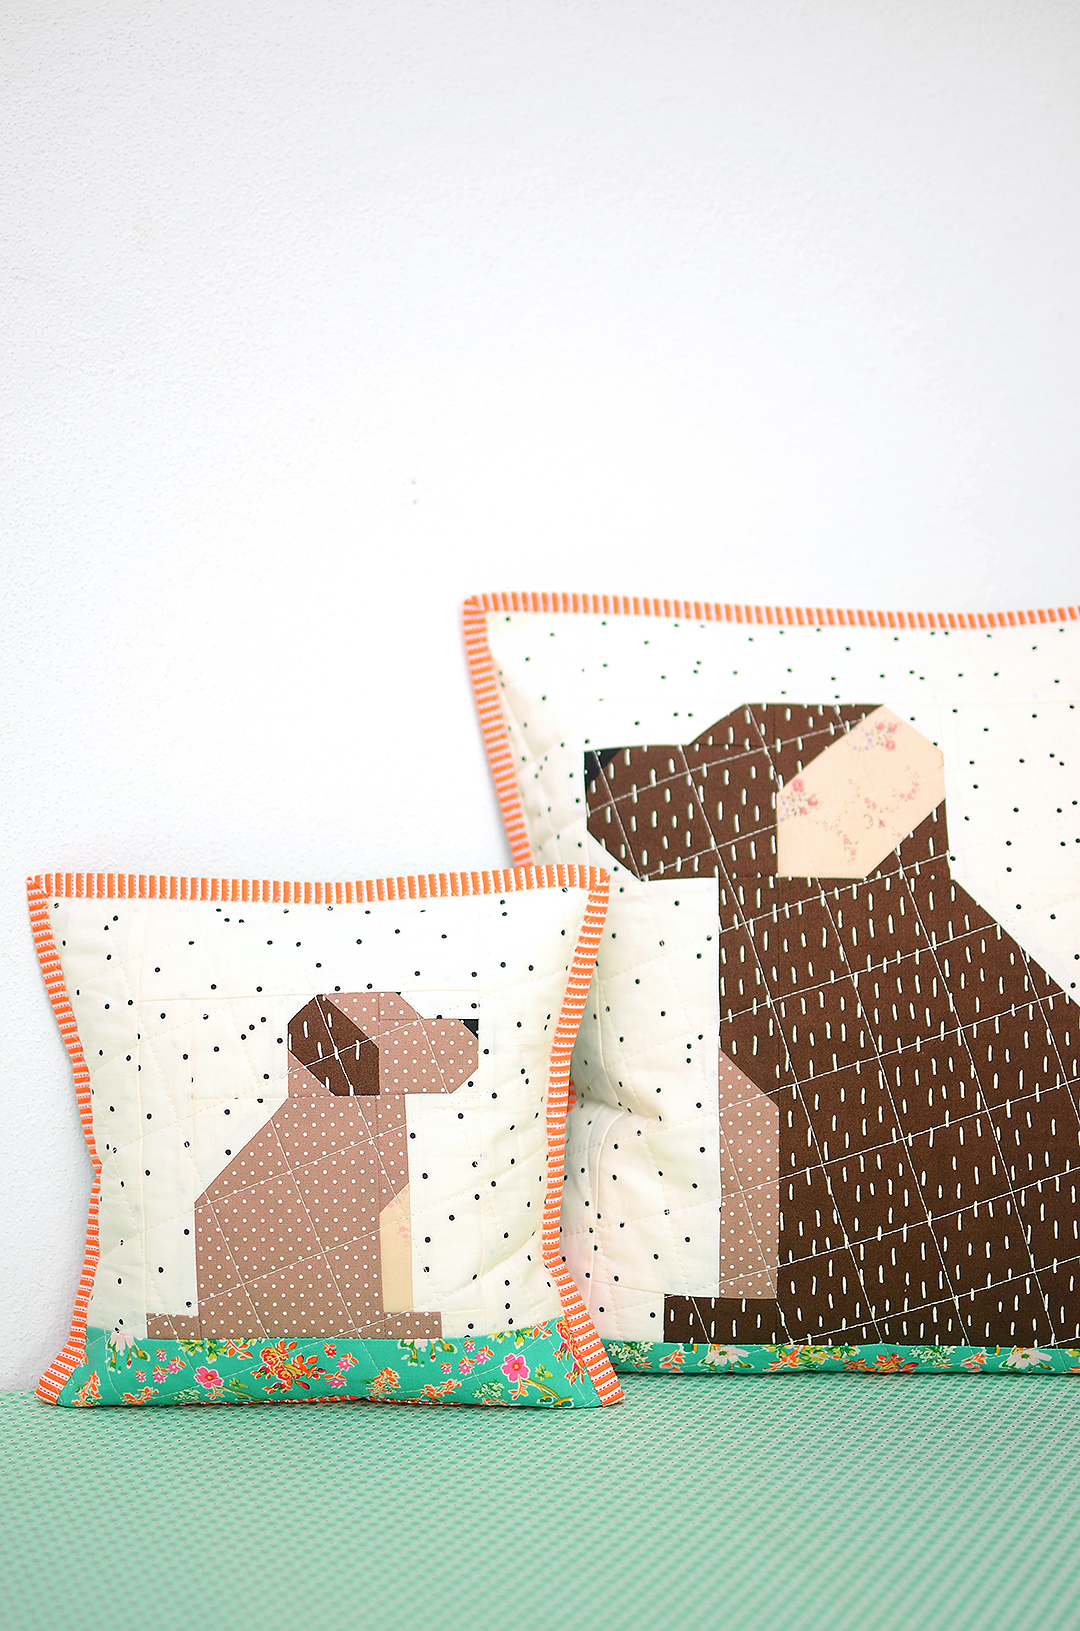 Quilted Puppy Pillow Tutorial & pattern add-on